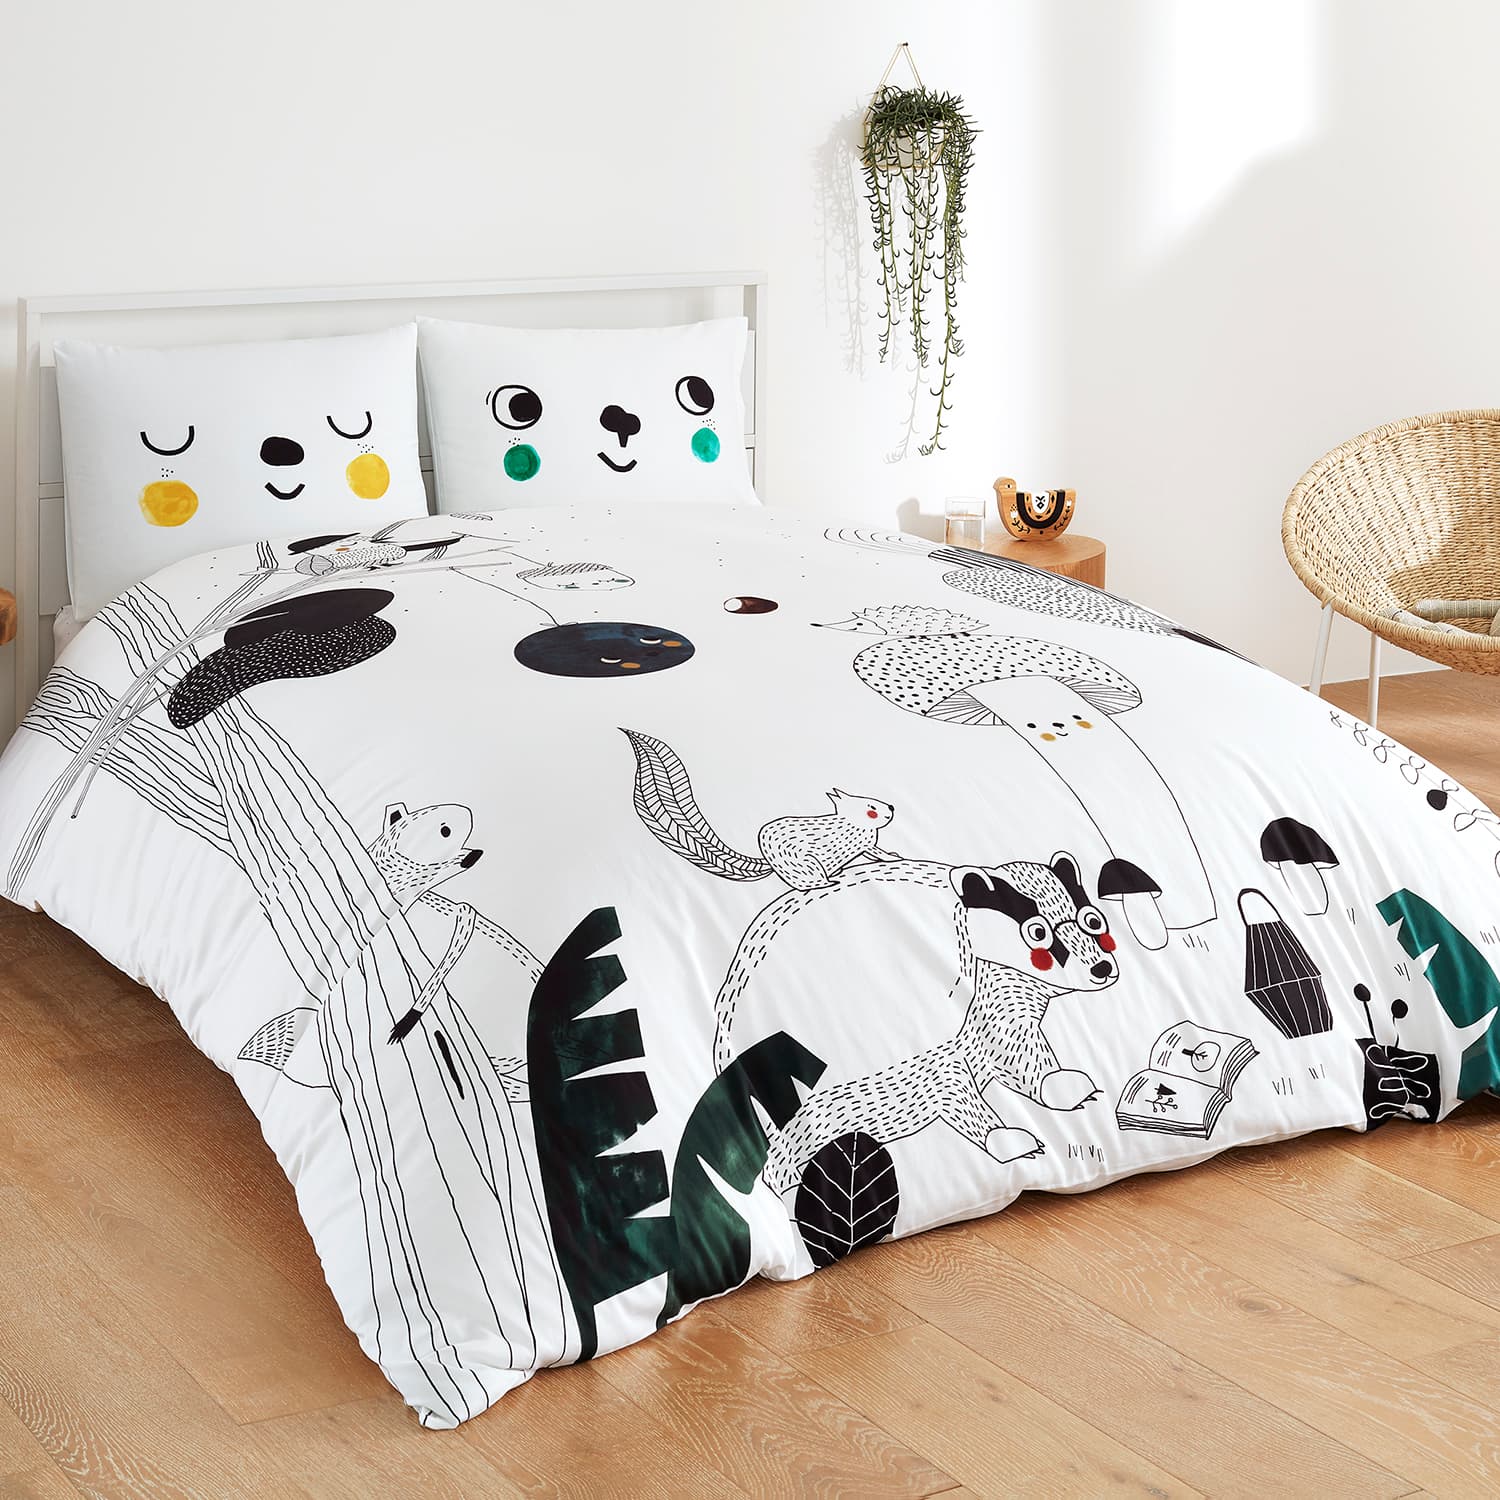 Woodland black and white bedding for kids, duvet and sheet set with woodland forest theme, hedgehog, fox, badger, squirrel.